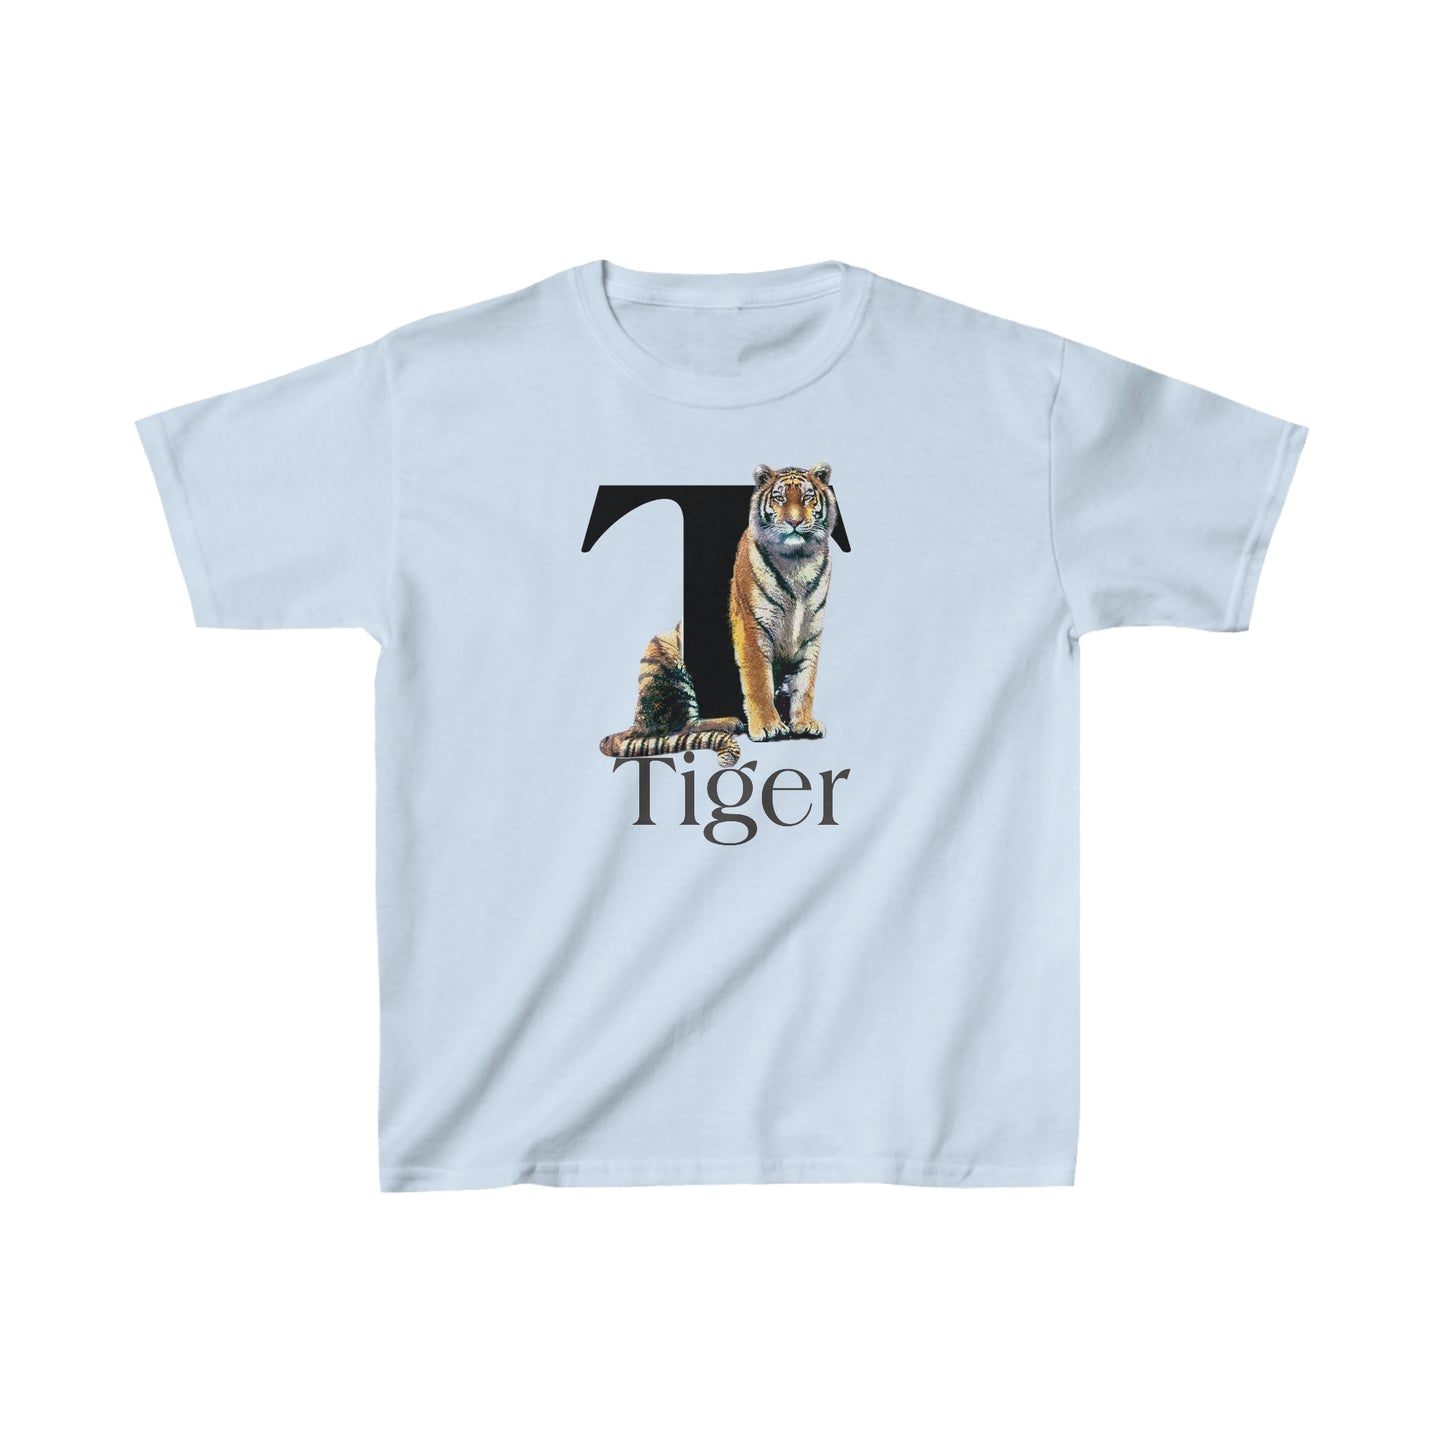 T is for Tiger T-Shirt, Terrific Tiger Tee, Tiger Drawing T-Shirt, Tiger Illustration t-shirt, animal alphabet T, animal letters Tee